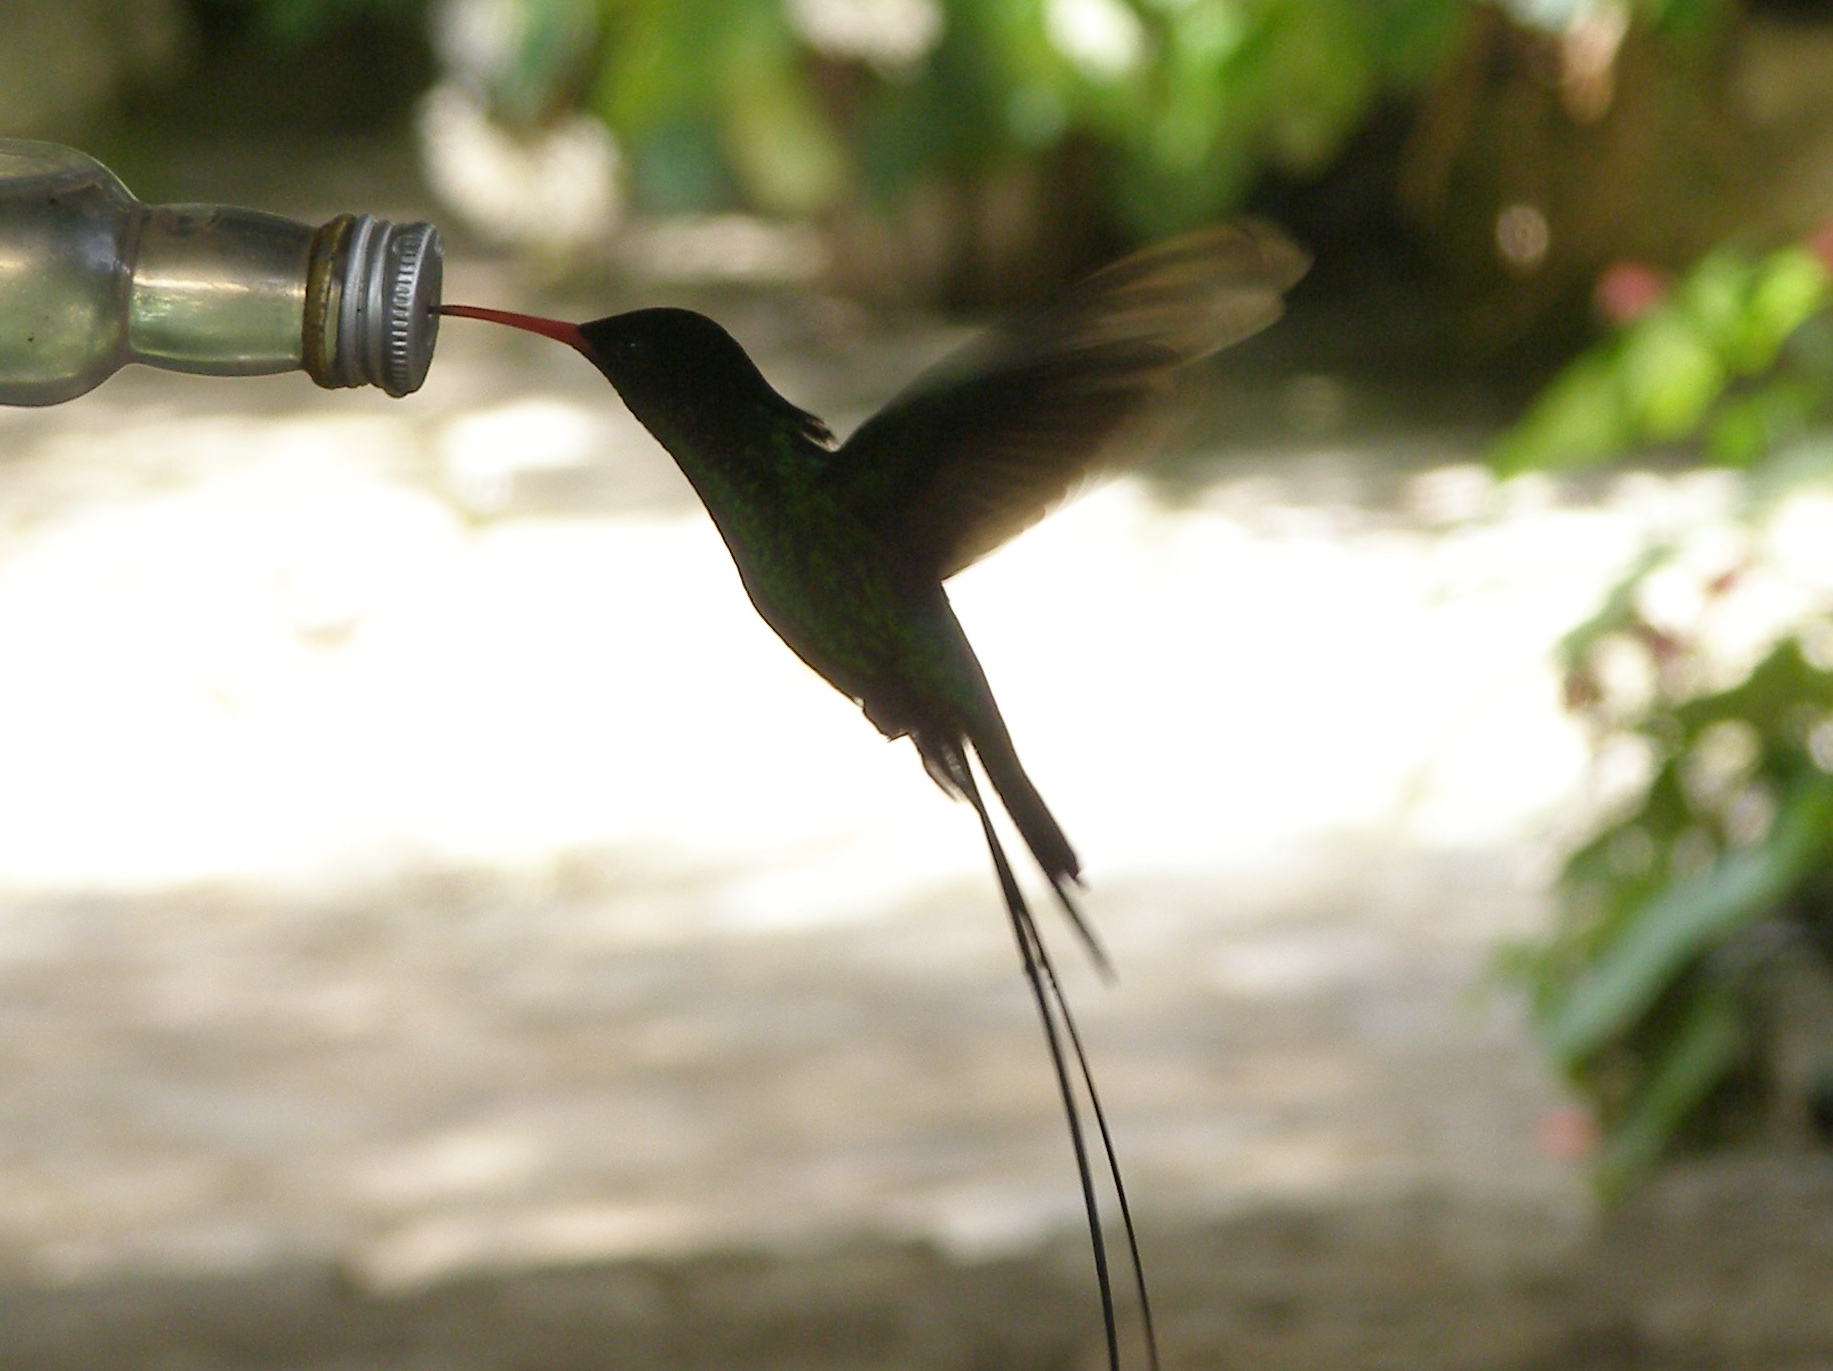 Click picture to see more Reb-billed Streamertails.